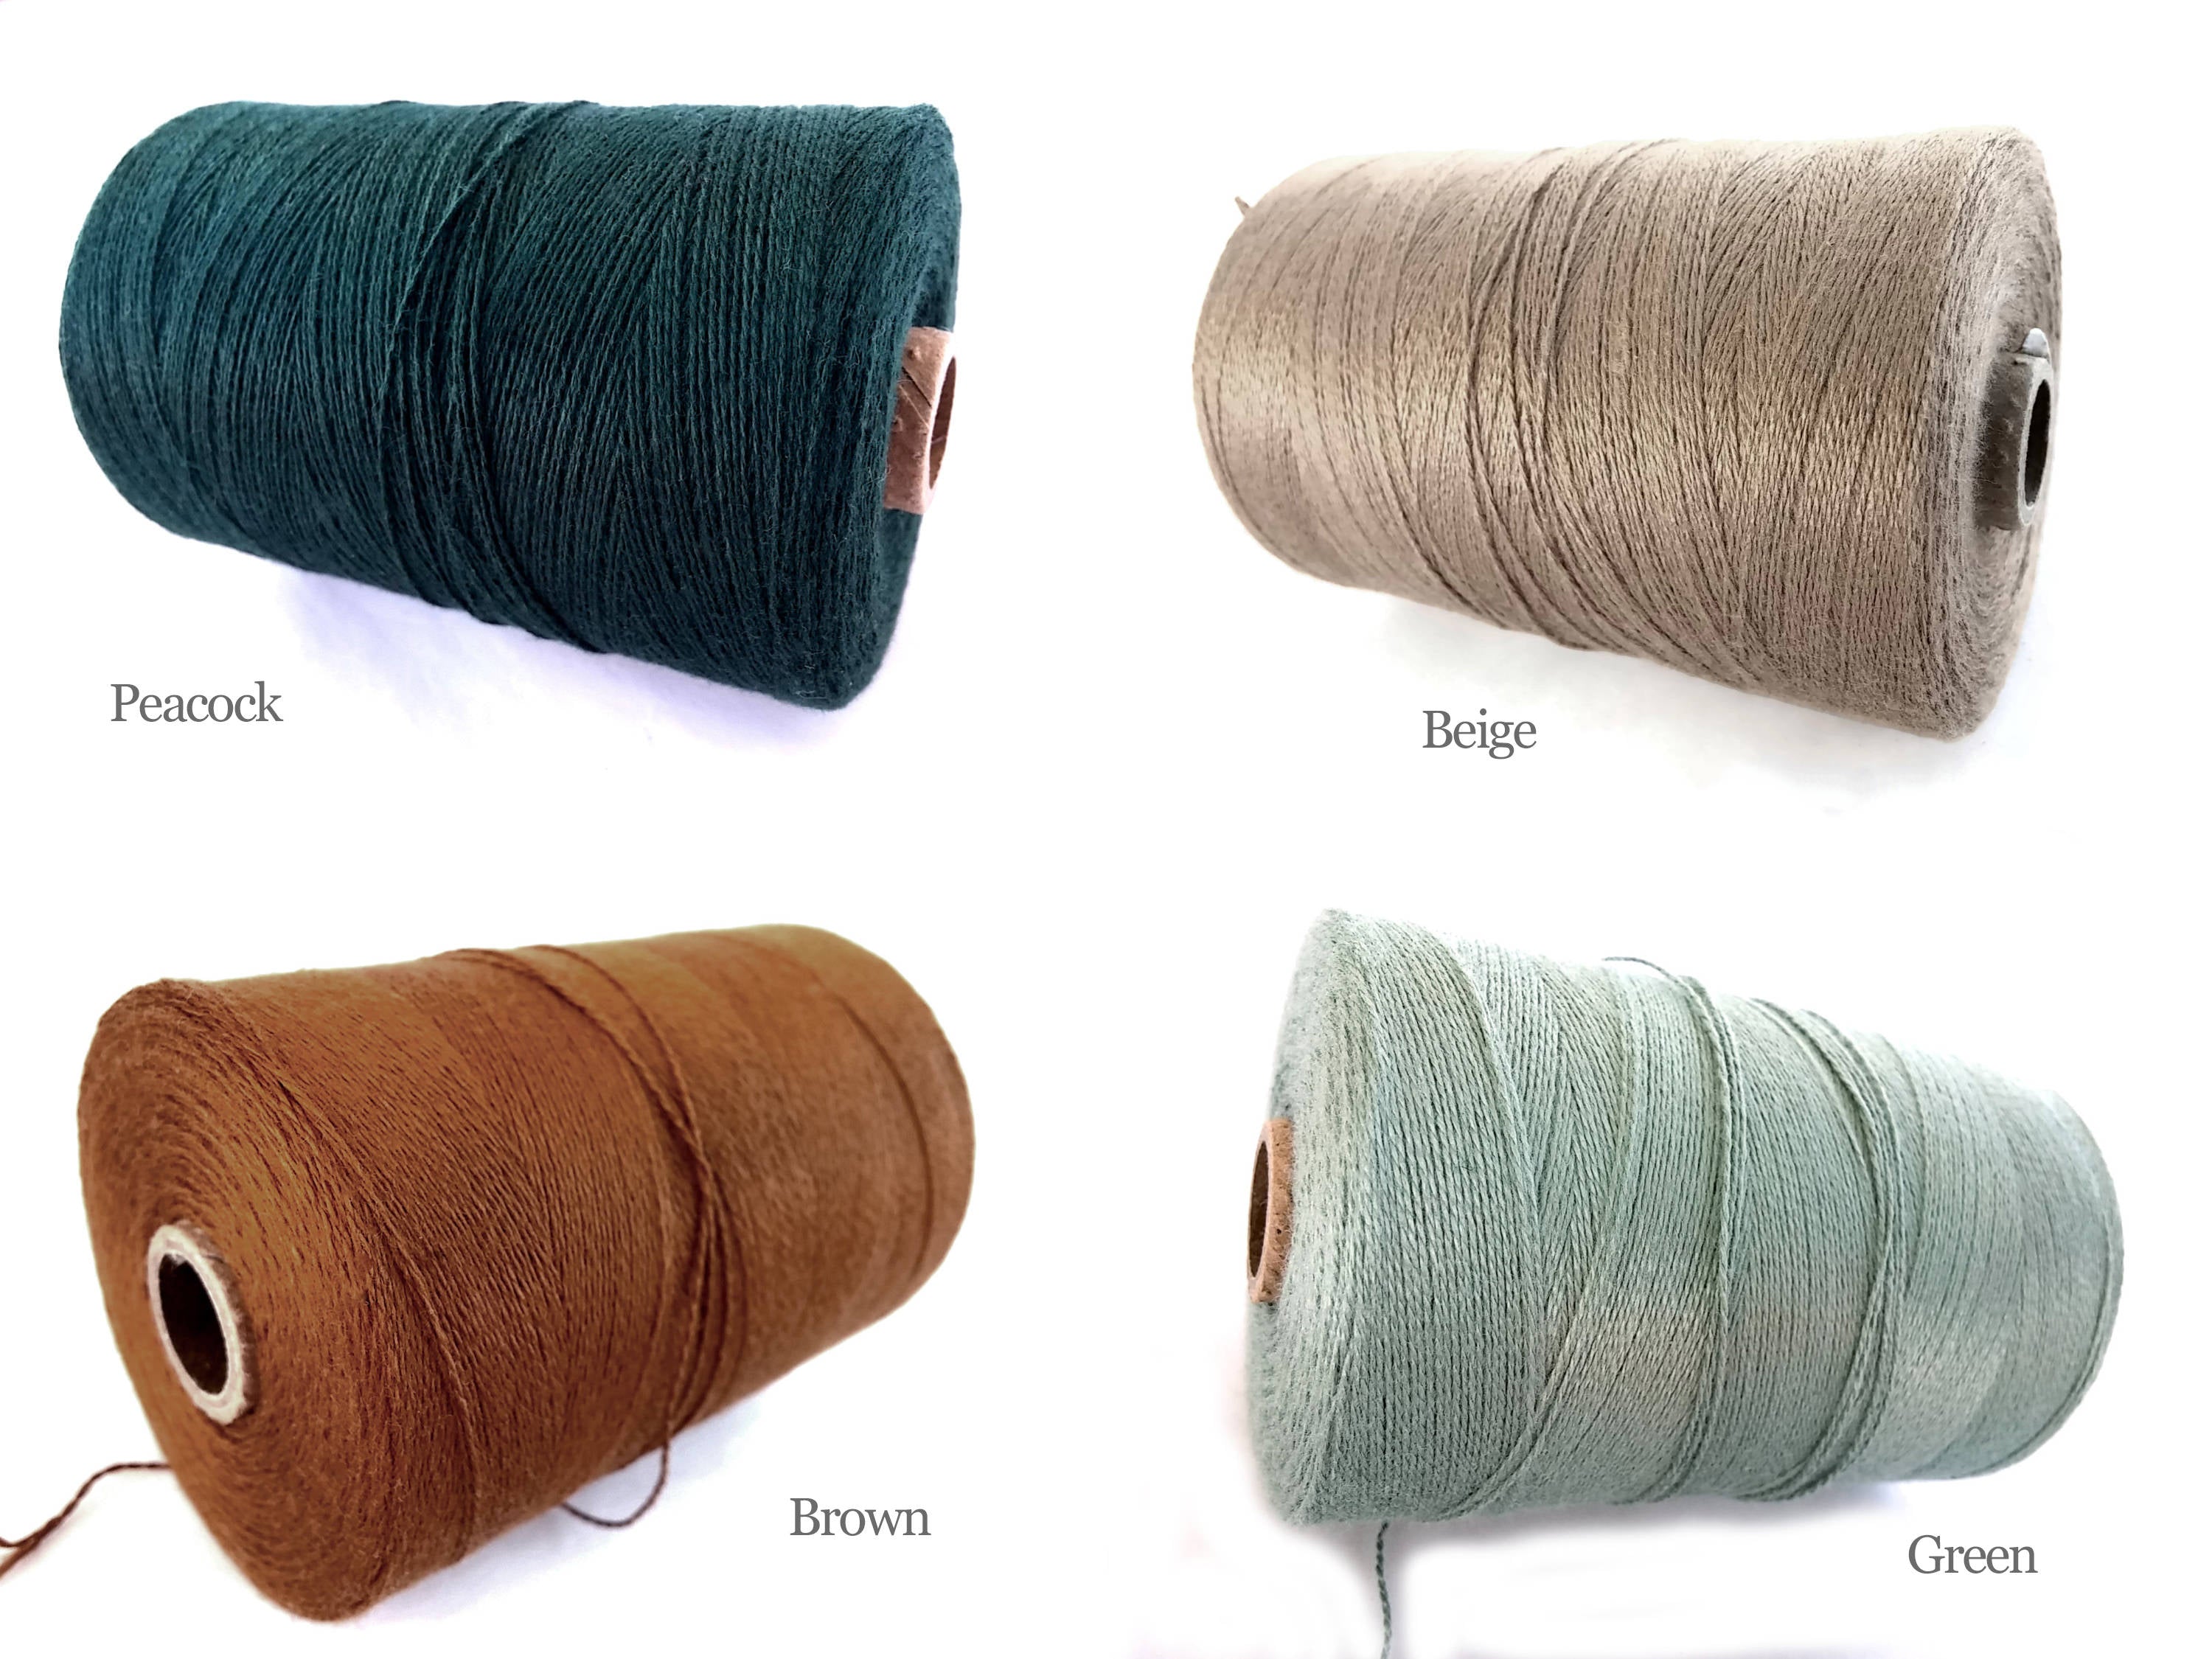 Twine Bamboo Cord 0.7mm - 10 meters/32.8 ft - 15 colors available